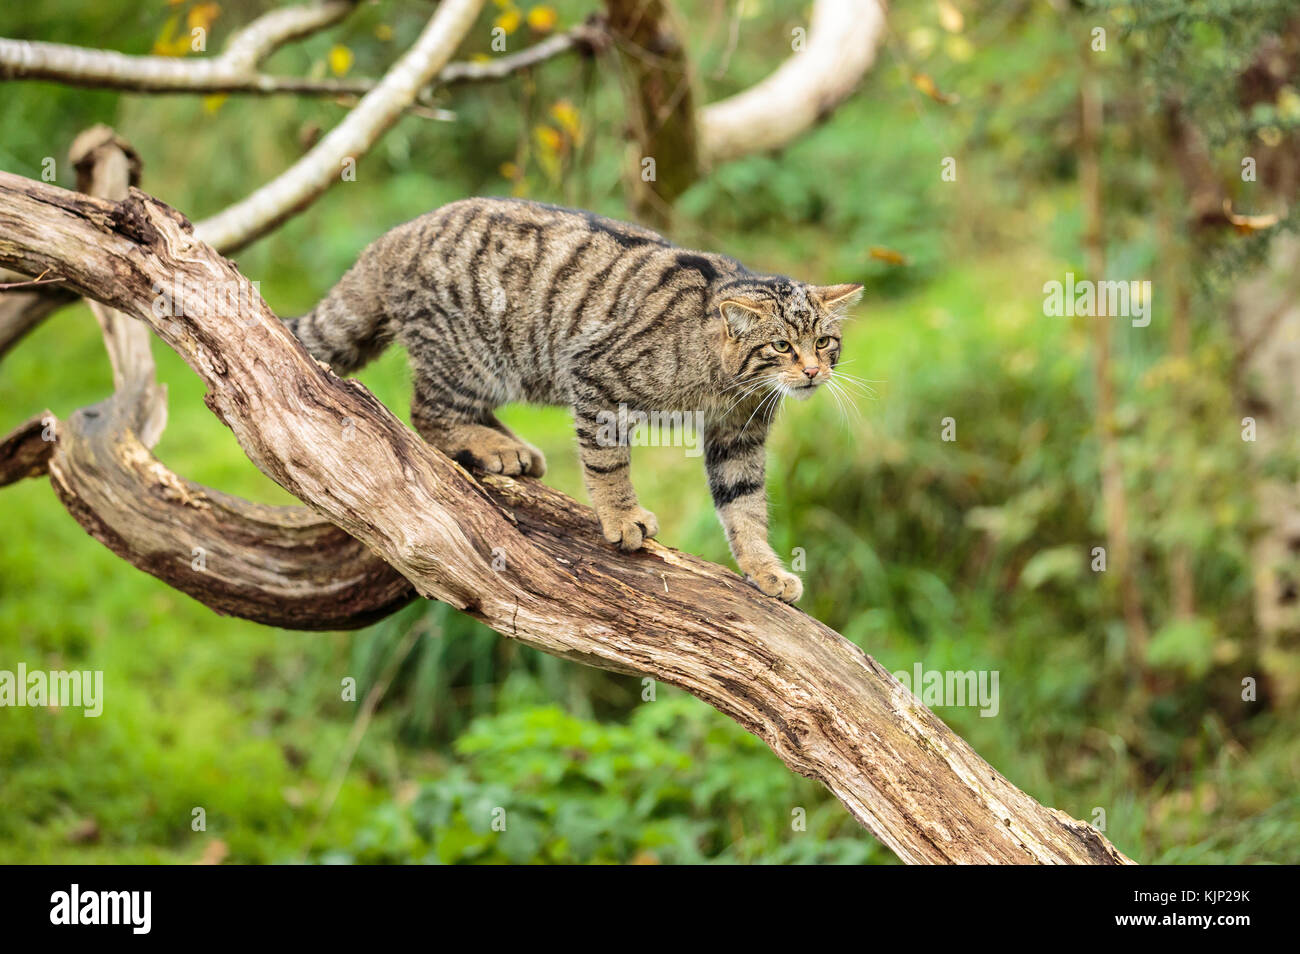 A Scottish Wildcat Or Highlands Tiger Stock Photo Alamy